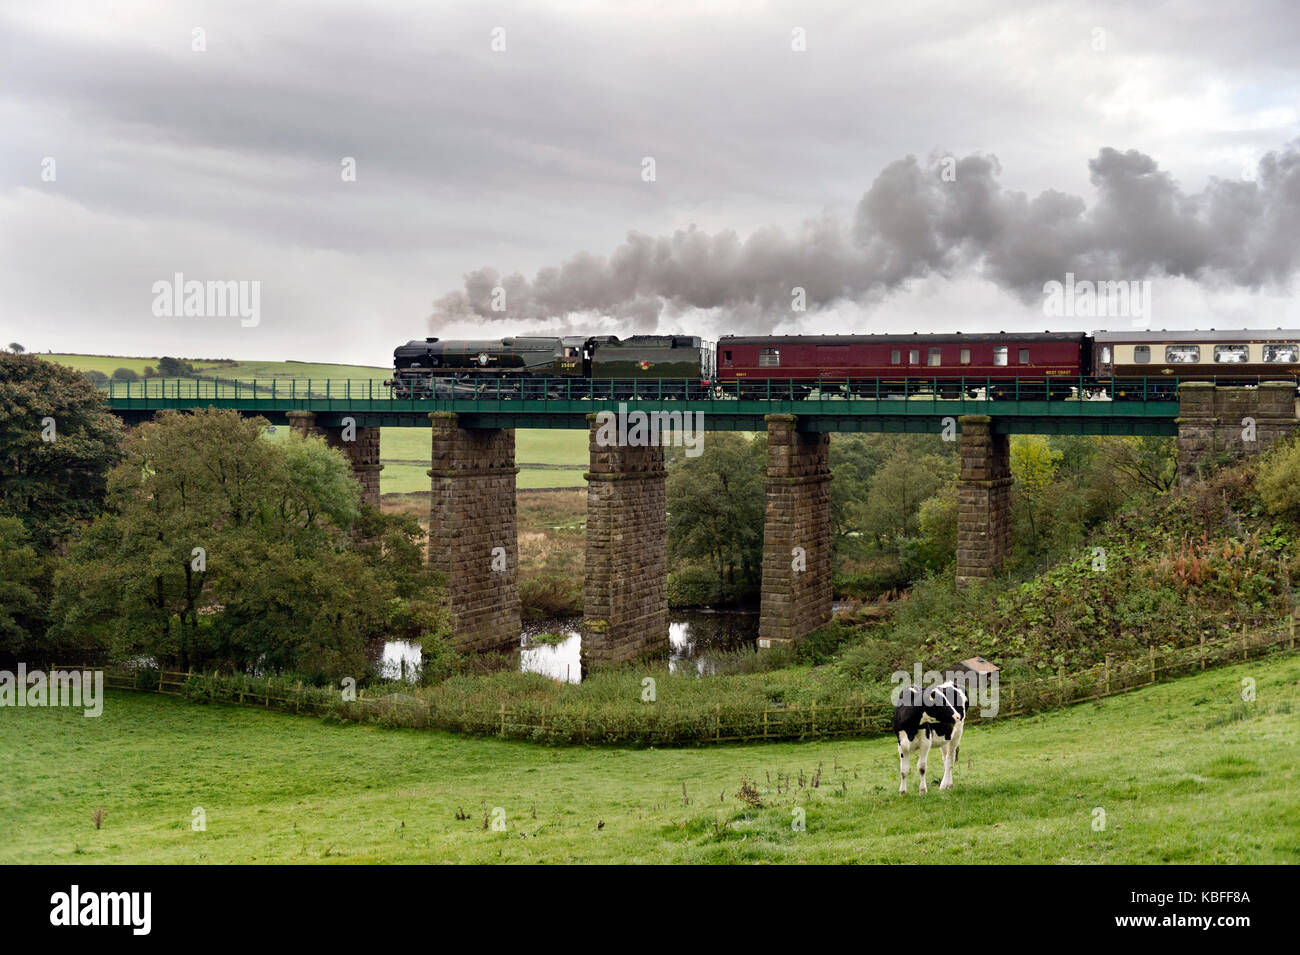 Clapham, North Yorkshire, UK. 30th September, 2017. Steam locomotive 'British India Line' No 35018 makes it's main-line passenger carrying debut, seen here at Clapham Viaduct, North Yorkshire, 30th September. The locomotive, originally recovered from the famous Barry scrapyard, has been undergoing restoration at Carnforth, Lancashire. Today, hauling the Lune Rivers Trust excursion, is the first occasion it has hauled a passenger carrying service on the main line and the first time it has been seen in its finished livery. Credit: John Bentley/Alamy Live News Stock Photo